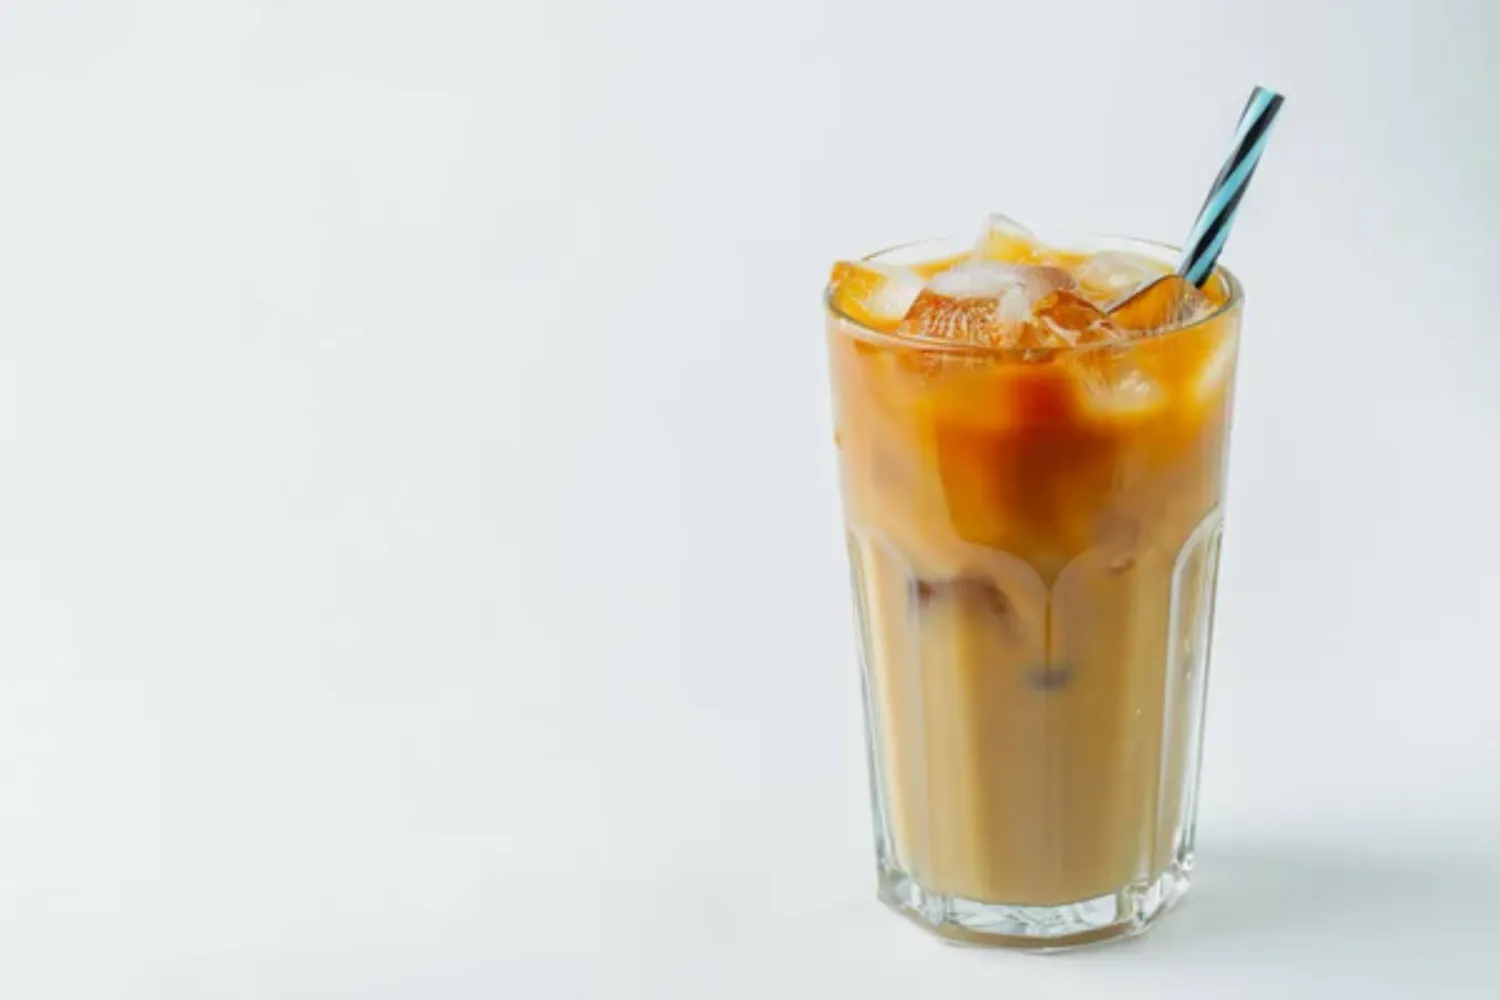 depositphotos 254490744 stock photo glass of cold coffee on